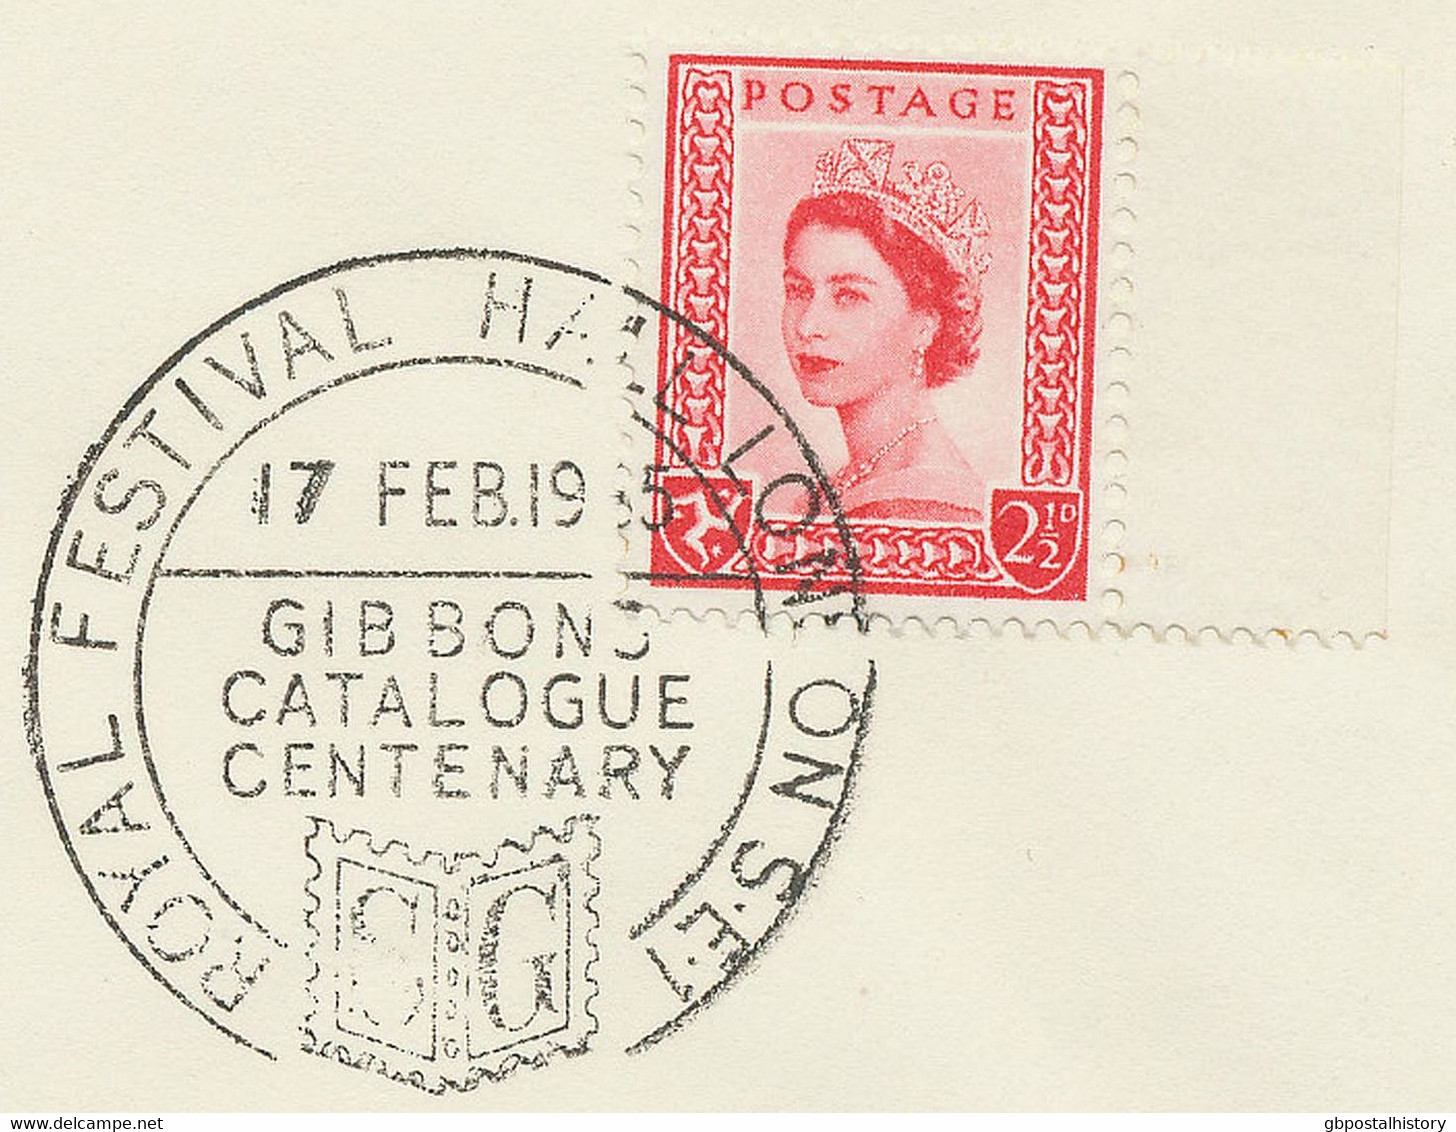 GB SPECIAL EVENT POSTMARK 1965 ROYAL FESTIVAL HALL LONDON S.E.1 GIBBONS CATALOGUE CENTENARY - Lettres & Documents